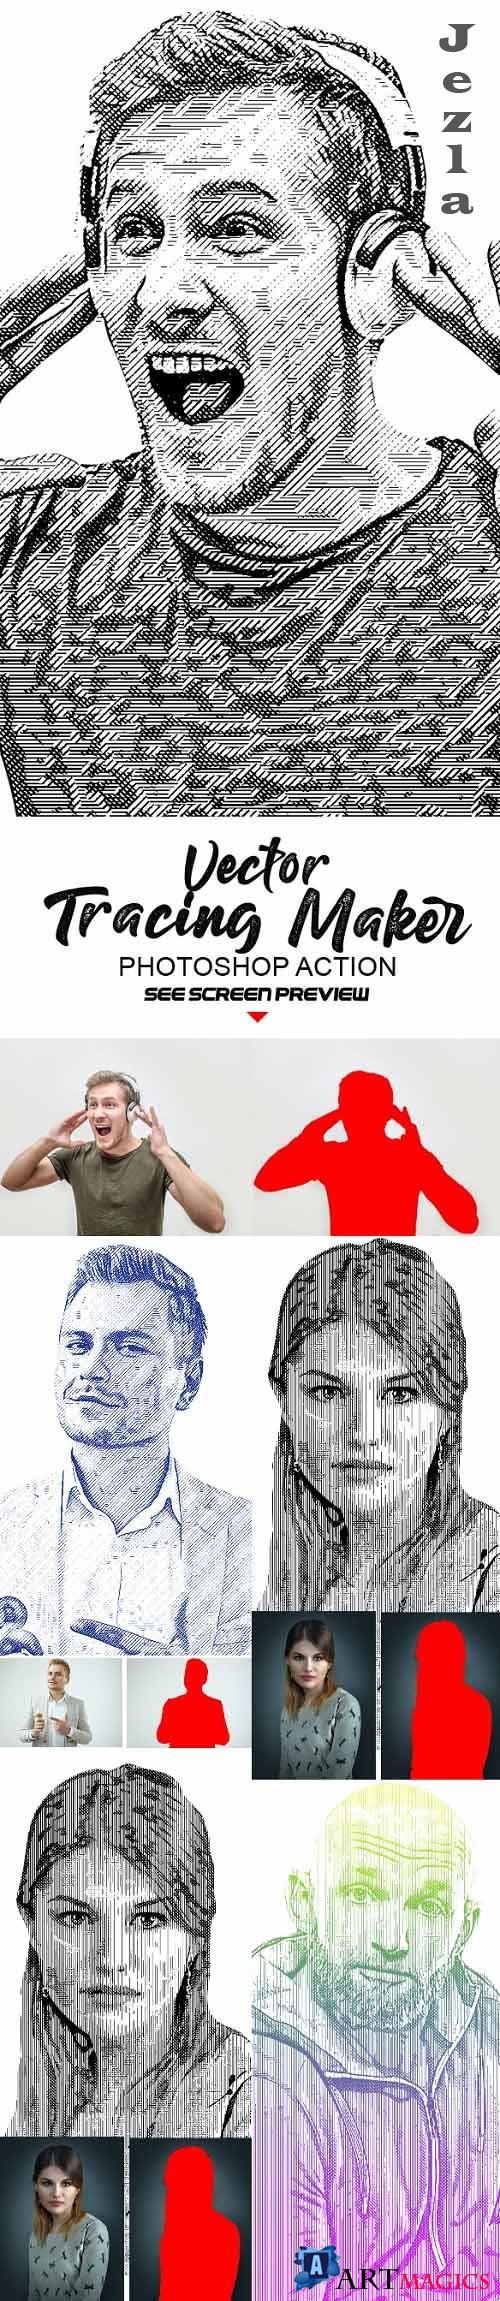 Vector Tracing Maker Action 26698268